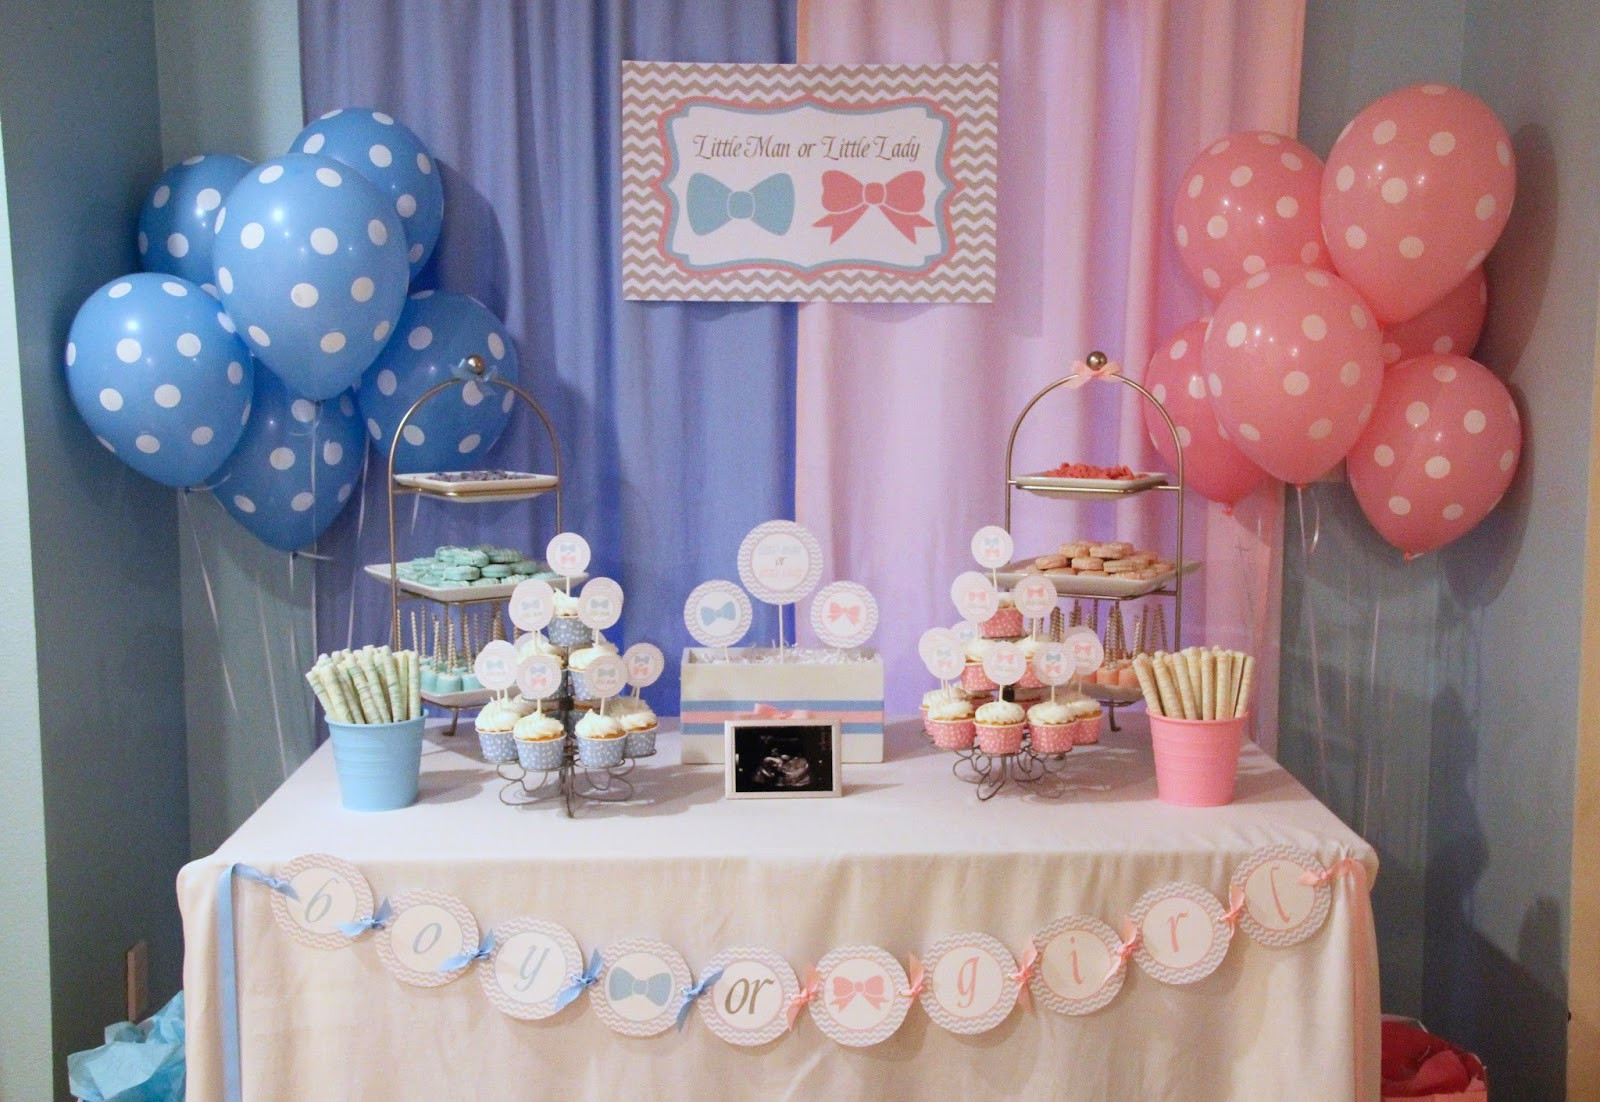 Gender Party Ideas
 5M Creations Gender Reveal Party Little Man or Little Lady